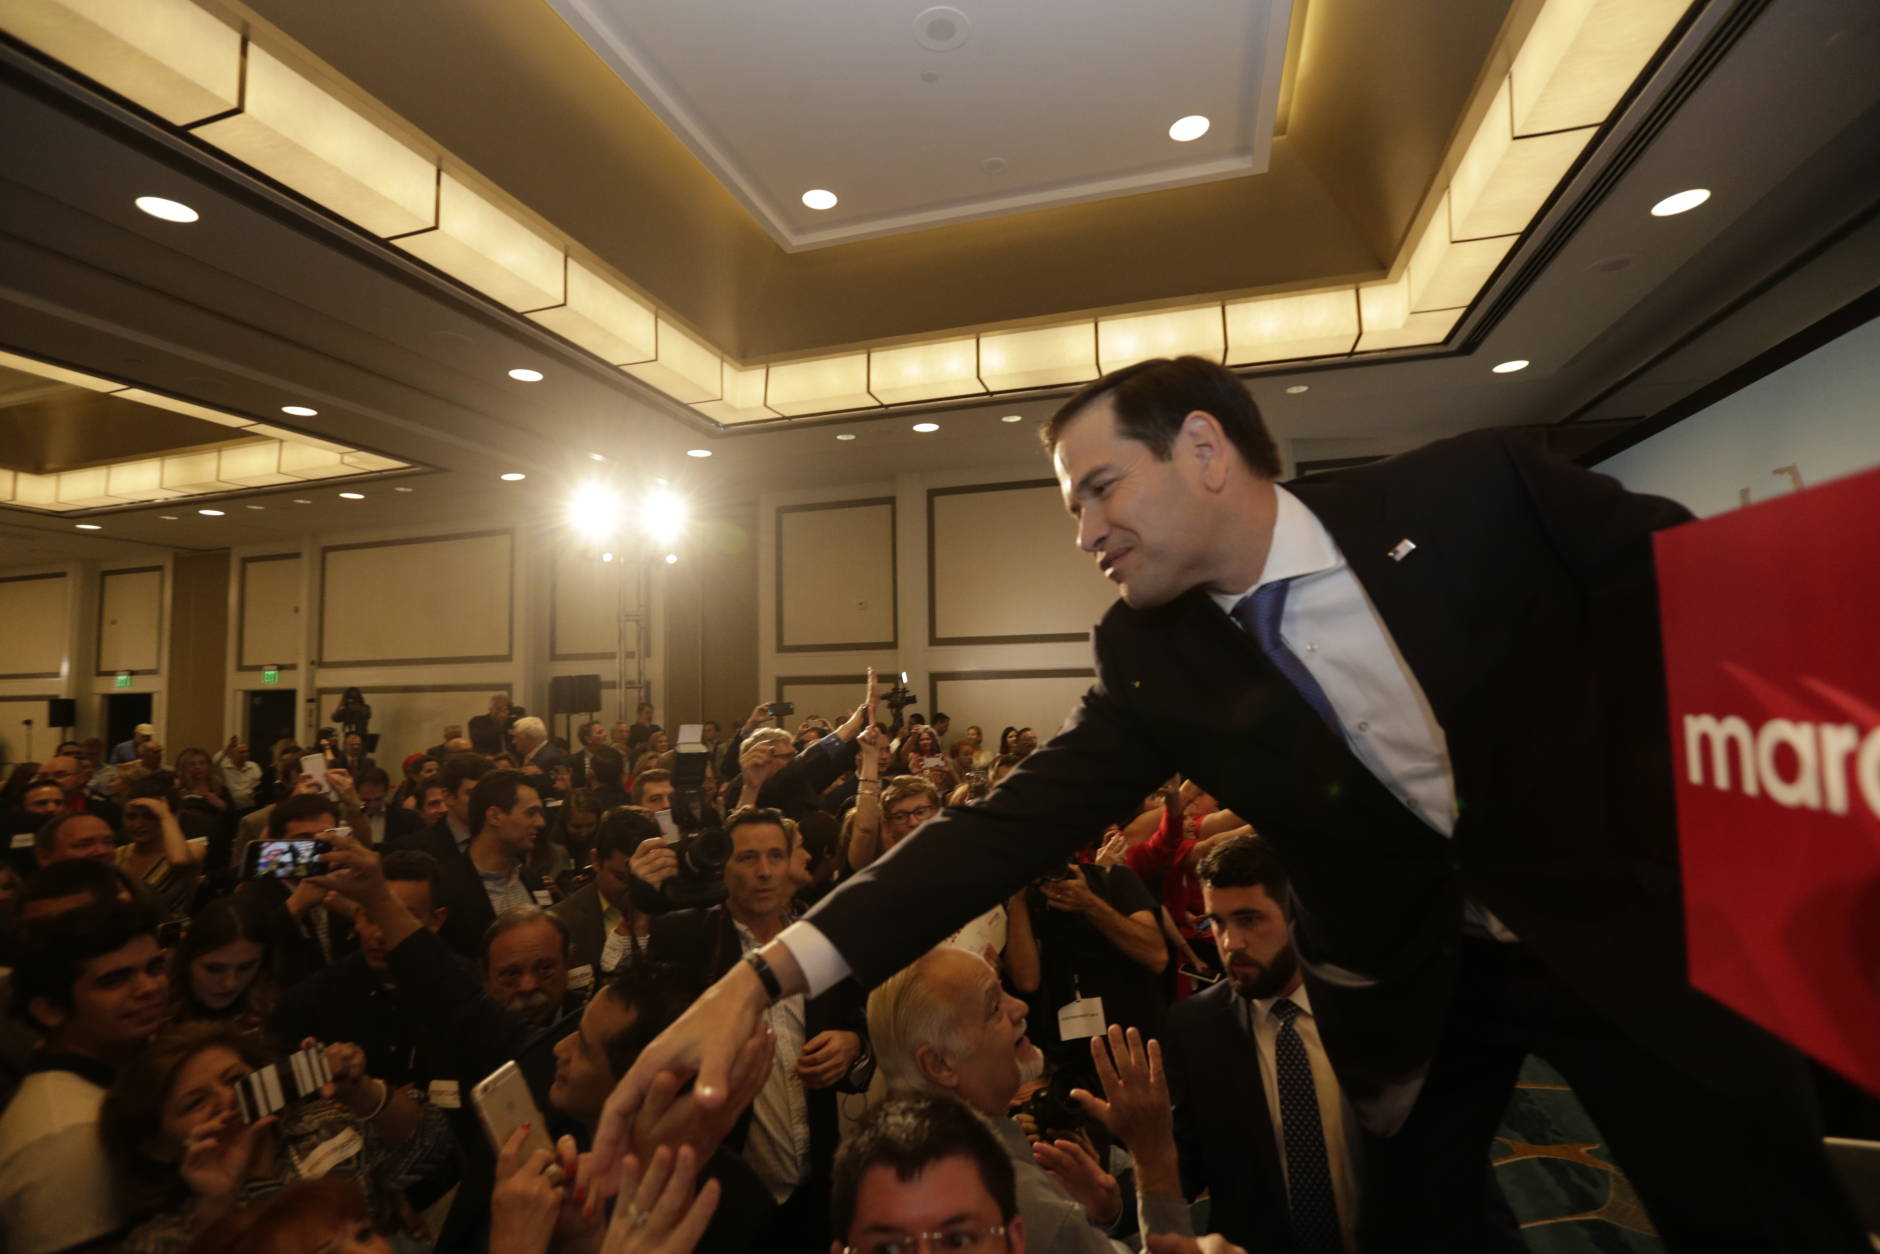 Florida Republican Sen. Marco Rubio greets supporters after winning a second term in office, Tuesday, Nov. 8, 2016 in Miami. Rubio defeated U.S. Rep. Patrick Murphy, a two-term congressman. (AP Photo/Wilfredo Lee)